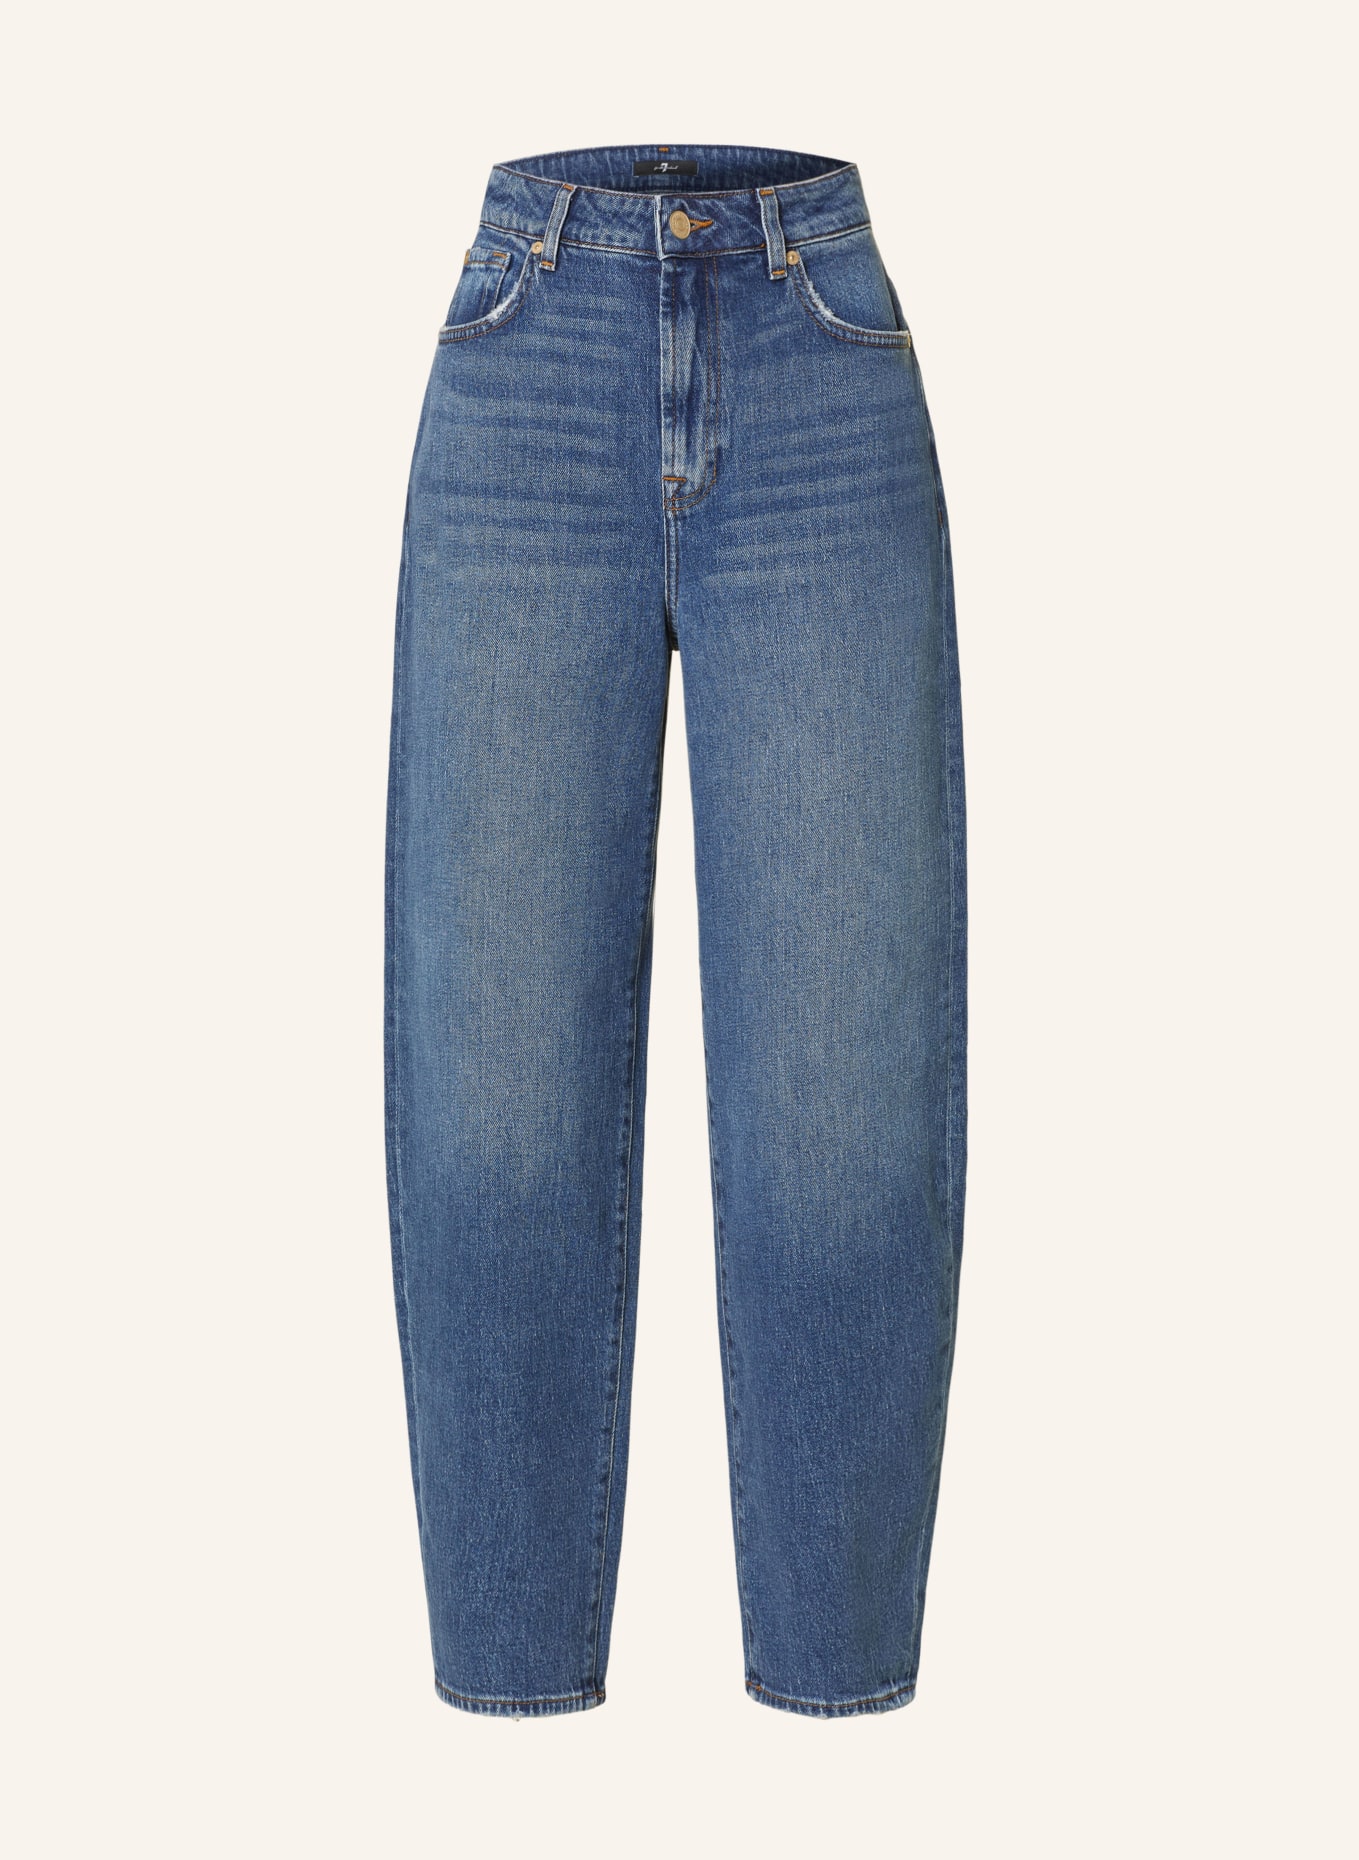 7 for all mankind Jeans JAYNE, Farbe: MID BLUE (Bild 1)